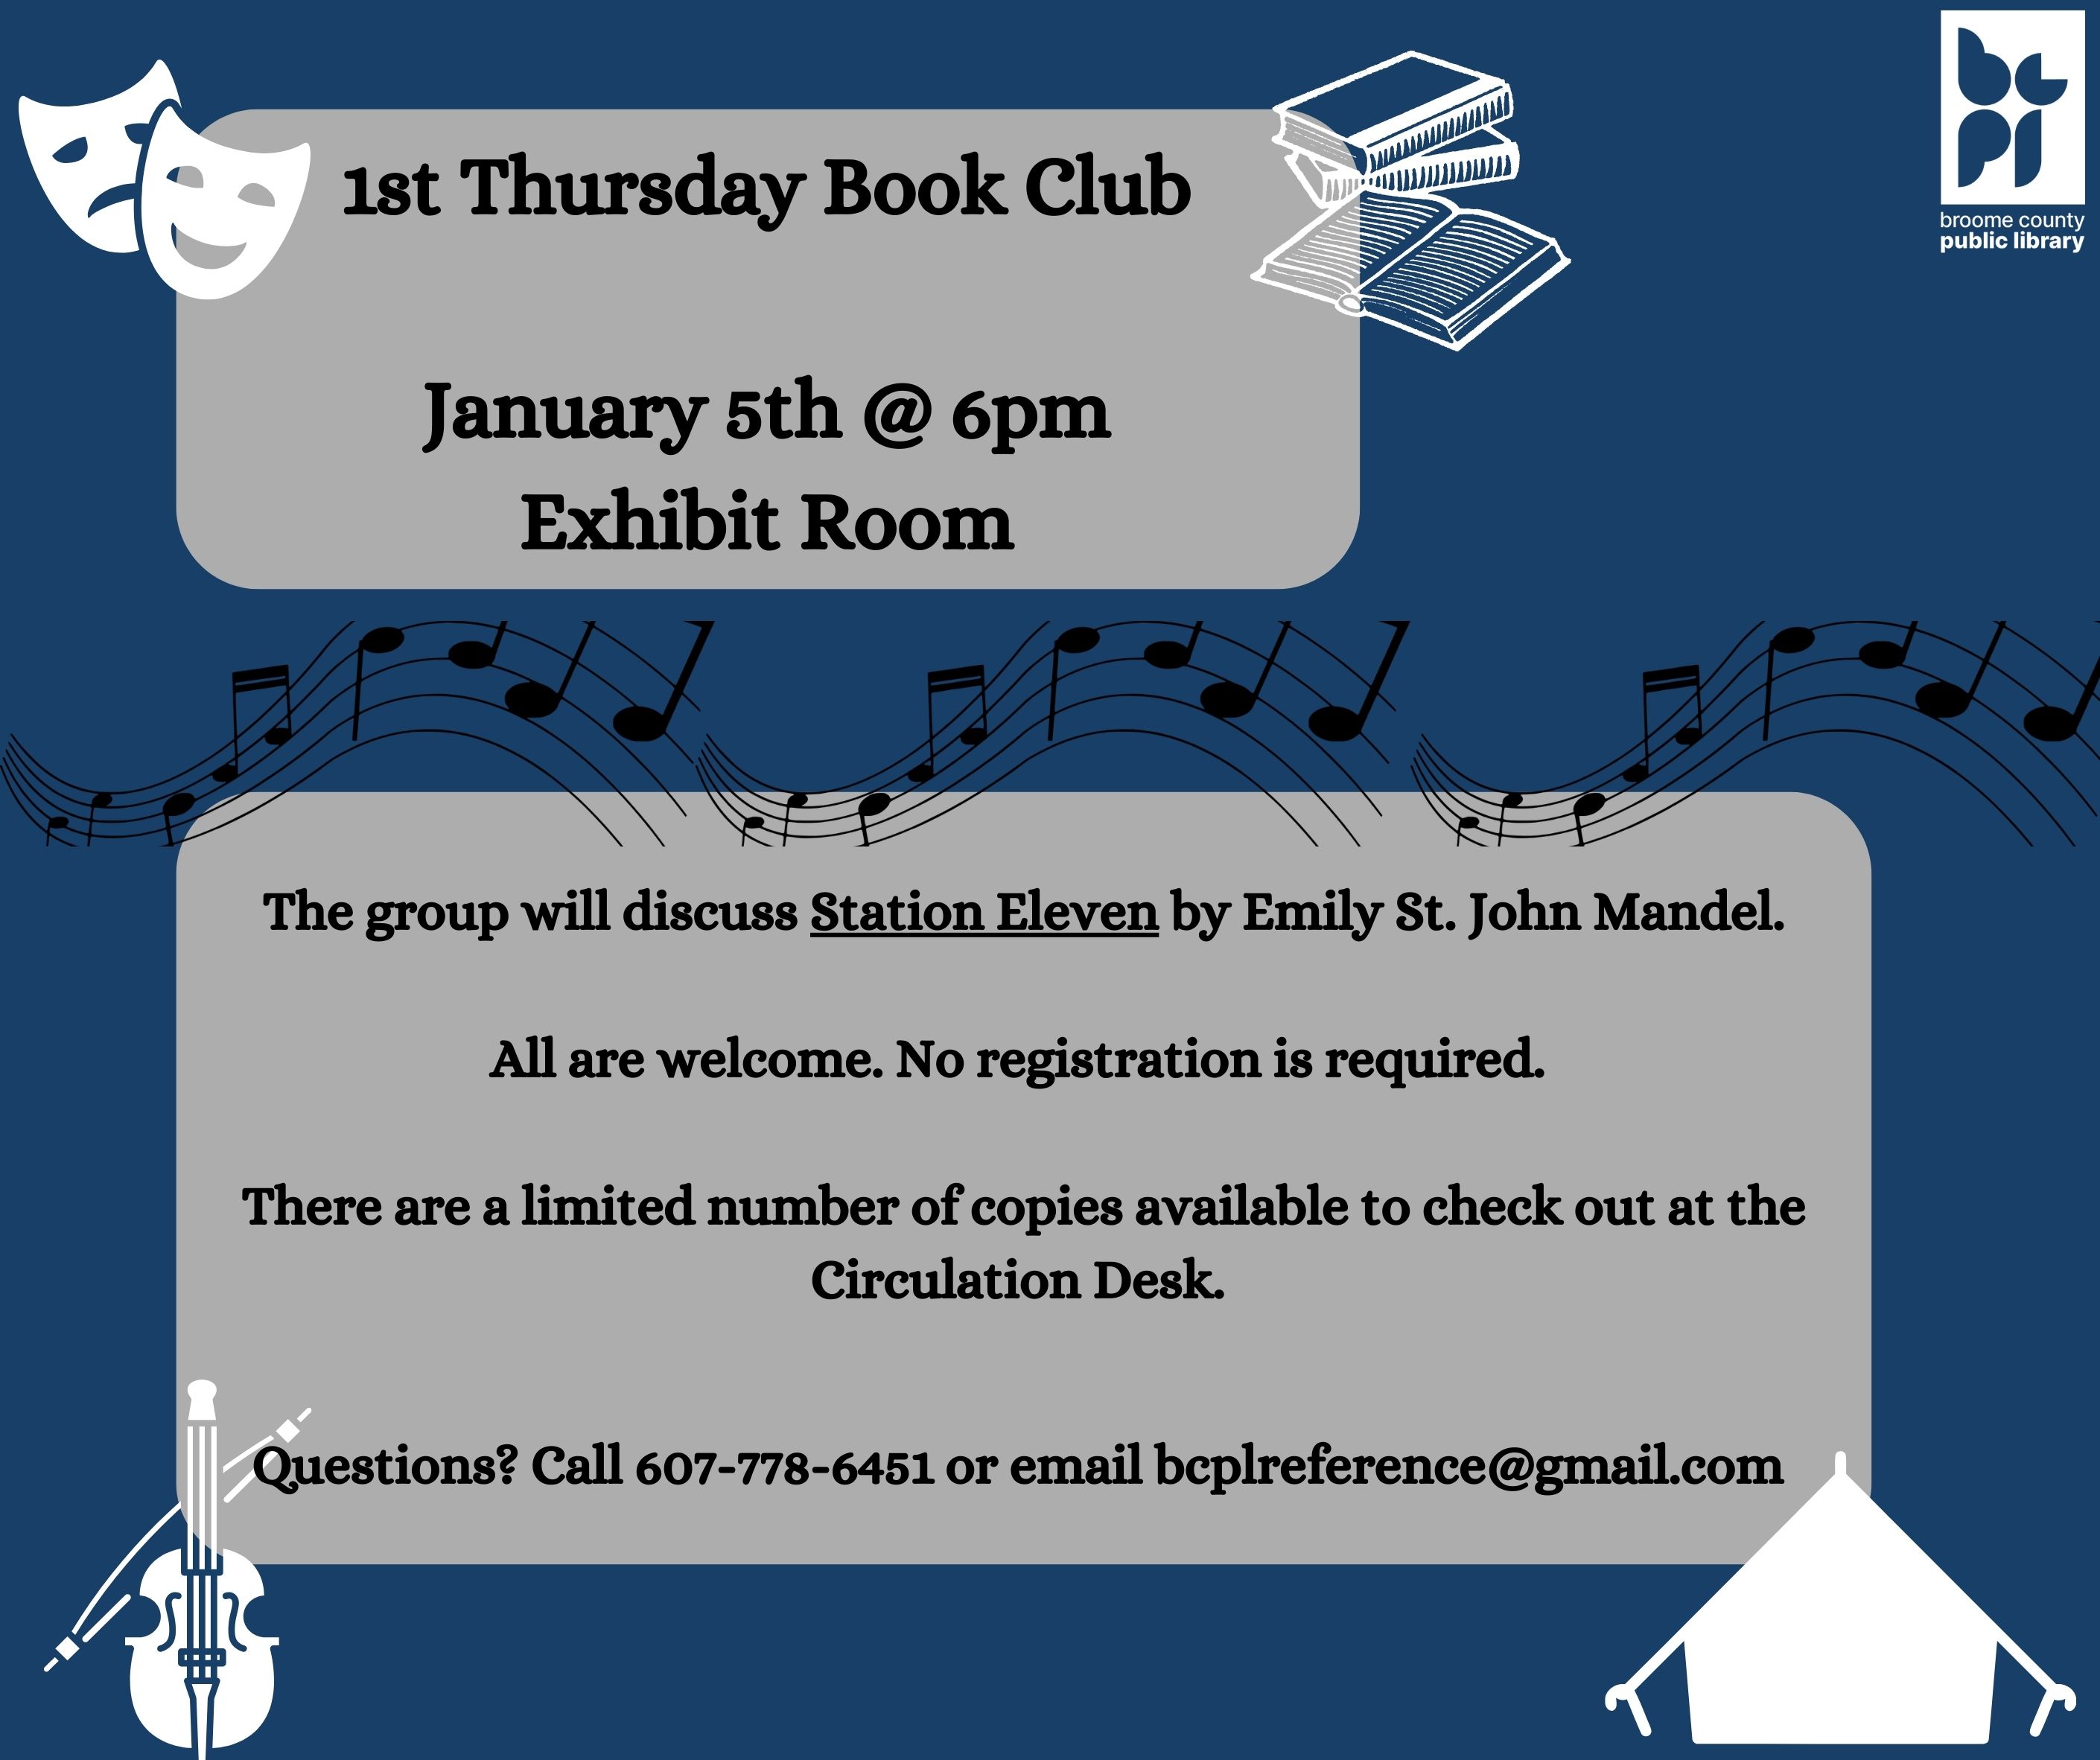 Describes the event and the details, including date and time and the book title. The group will be reading Station Eleven. The background is dark blue and there are pictures of theater masks, a cello, a tent, books, and music notes.